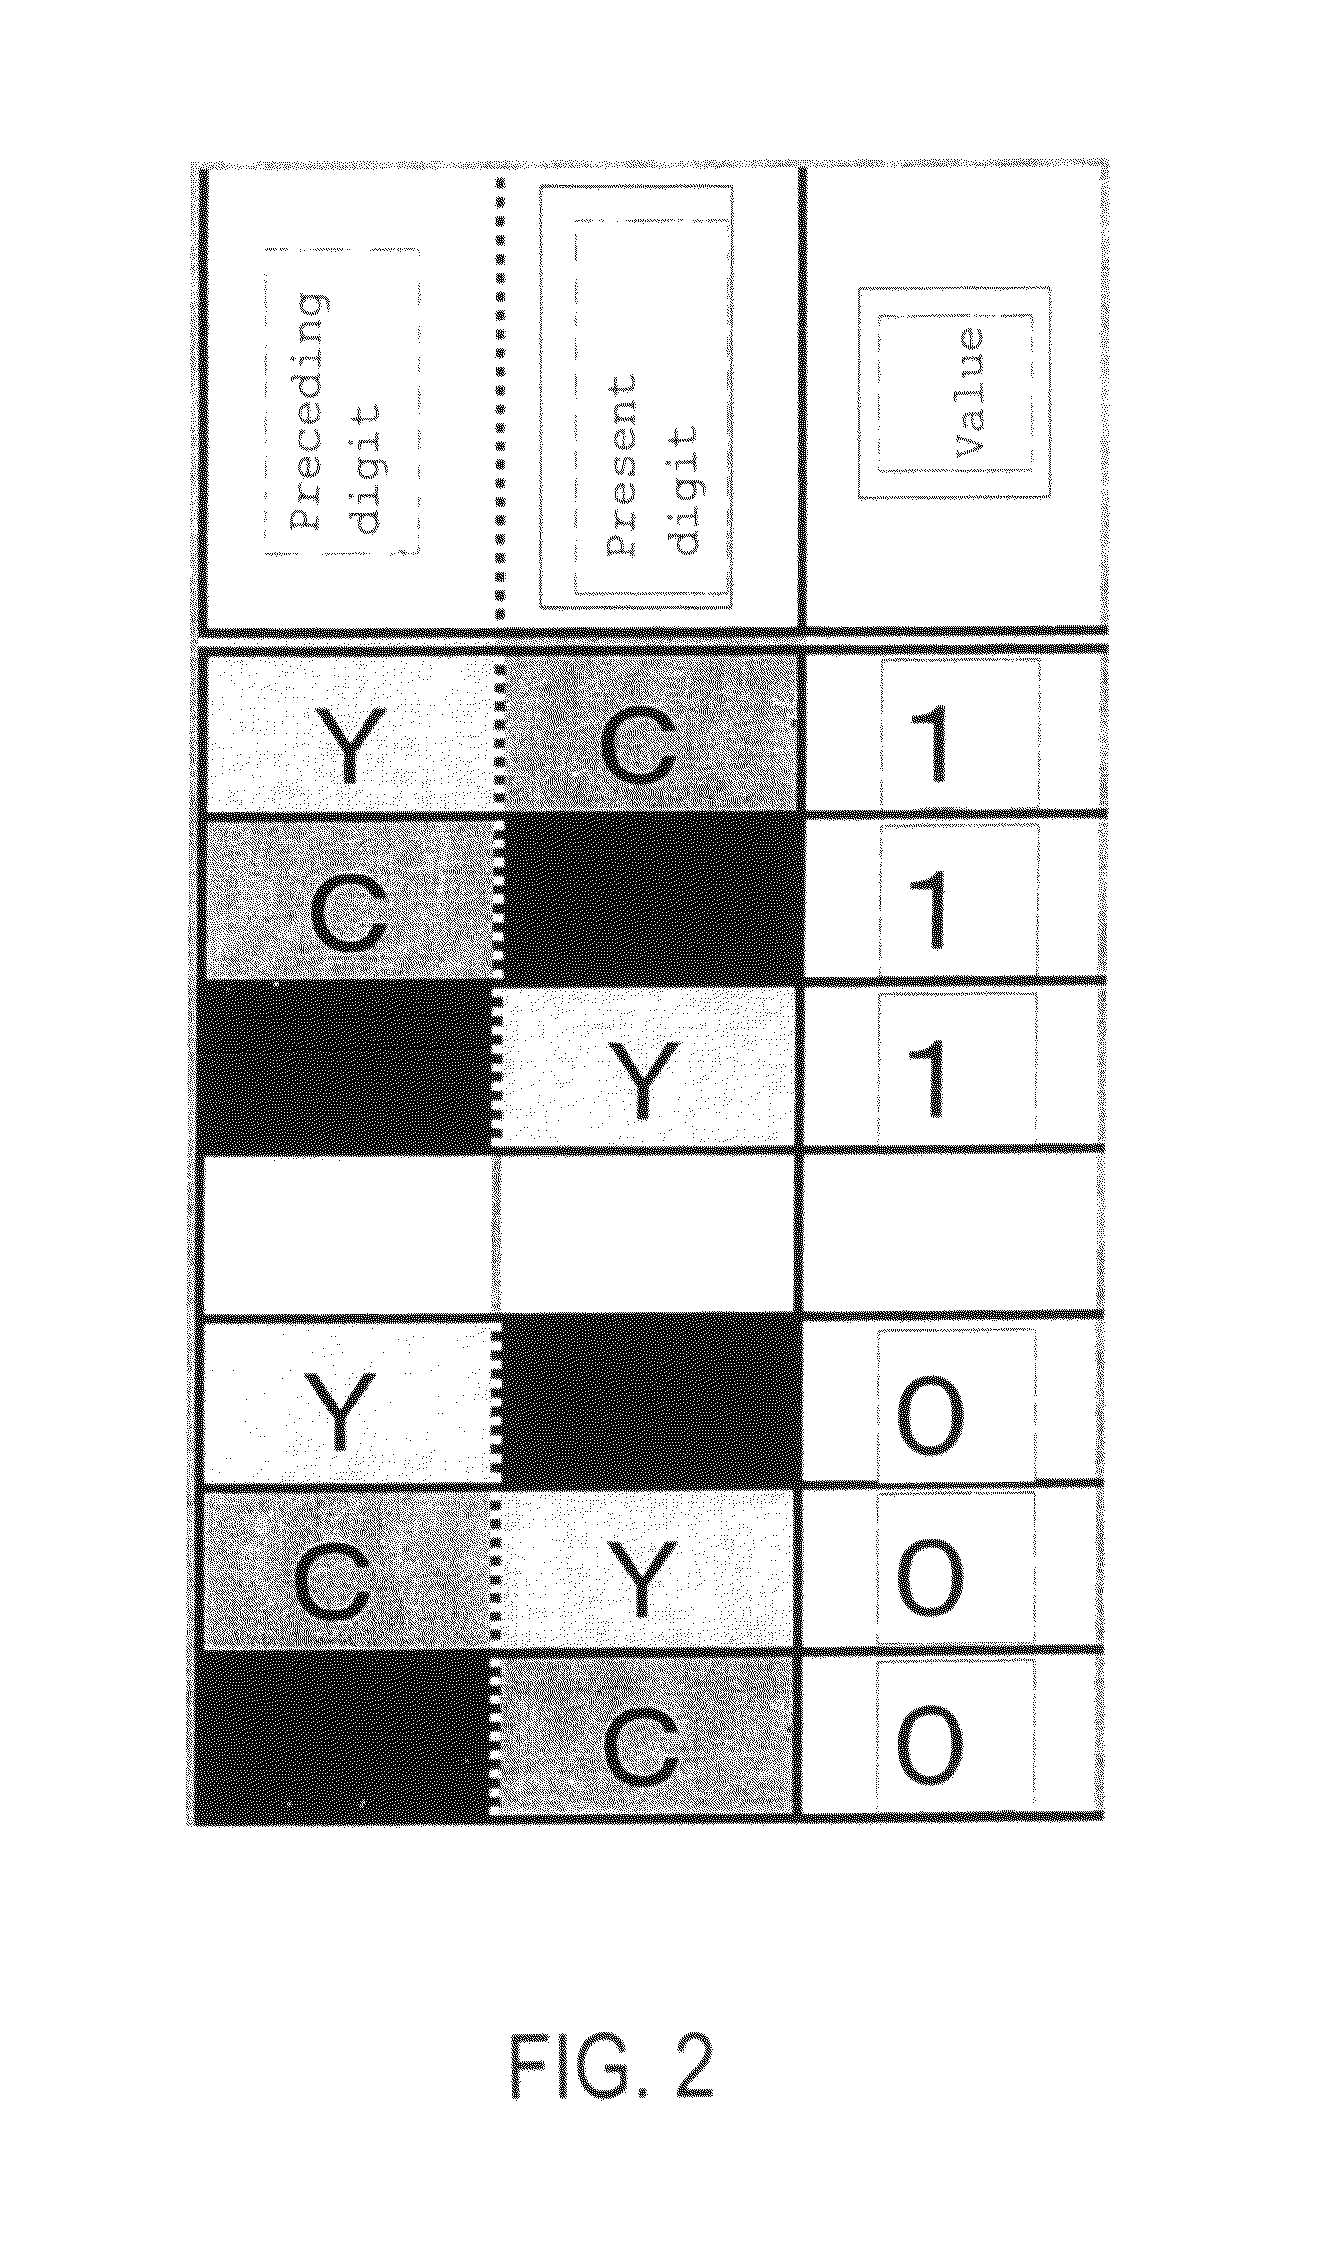 Apparatus for recognizing an optical recognition code in which a code symbol of a 1-dimensional color bit code indicative of certain data is divided into a plurality of code symbols